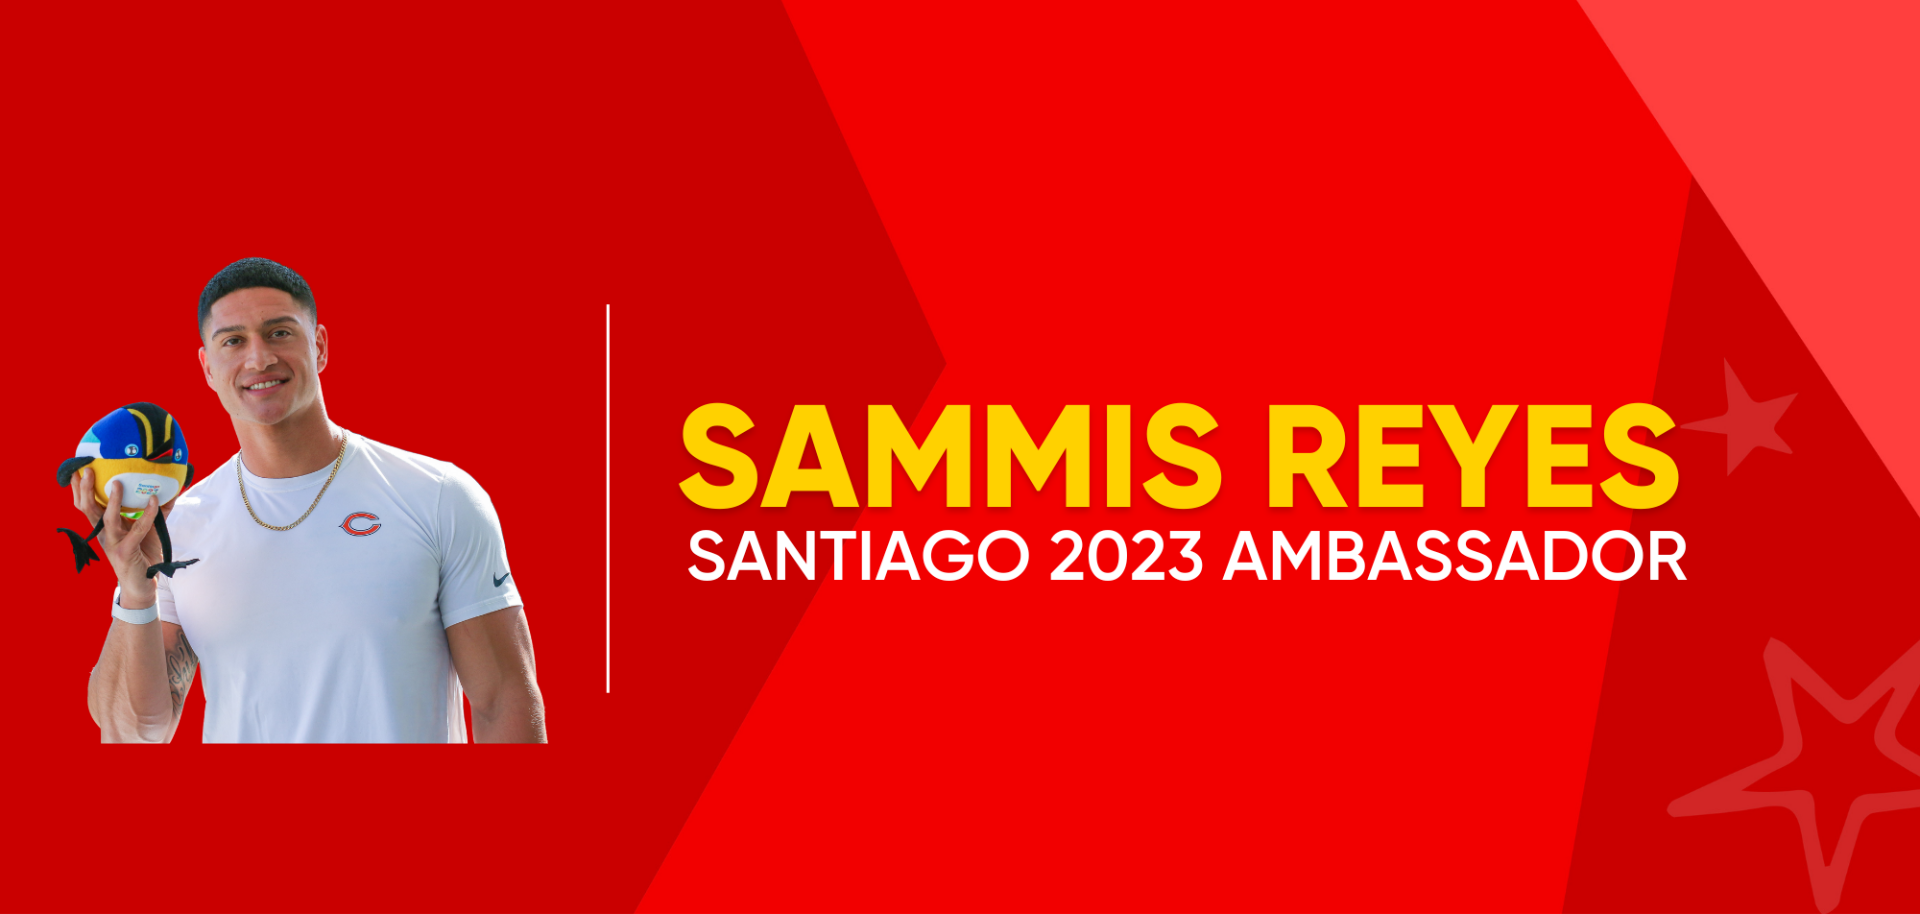 Sammis Reyes joins the ambassadors team. (Picture from: Santiago 2023).